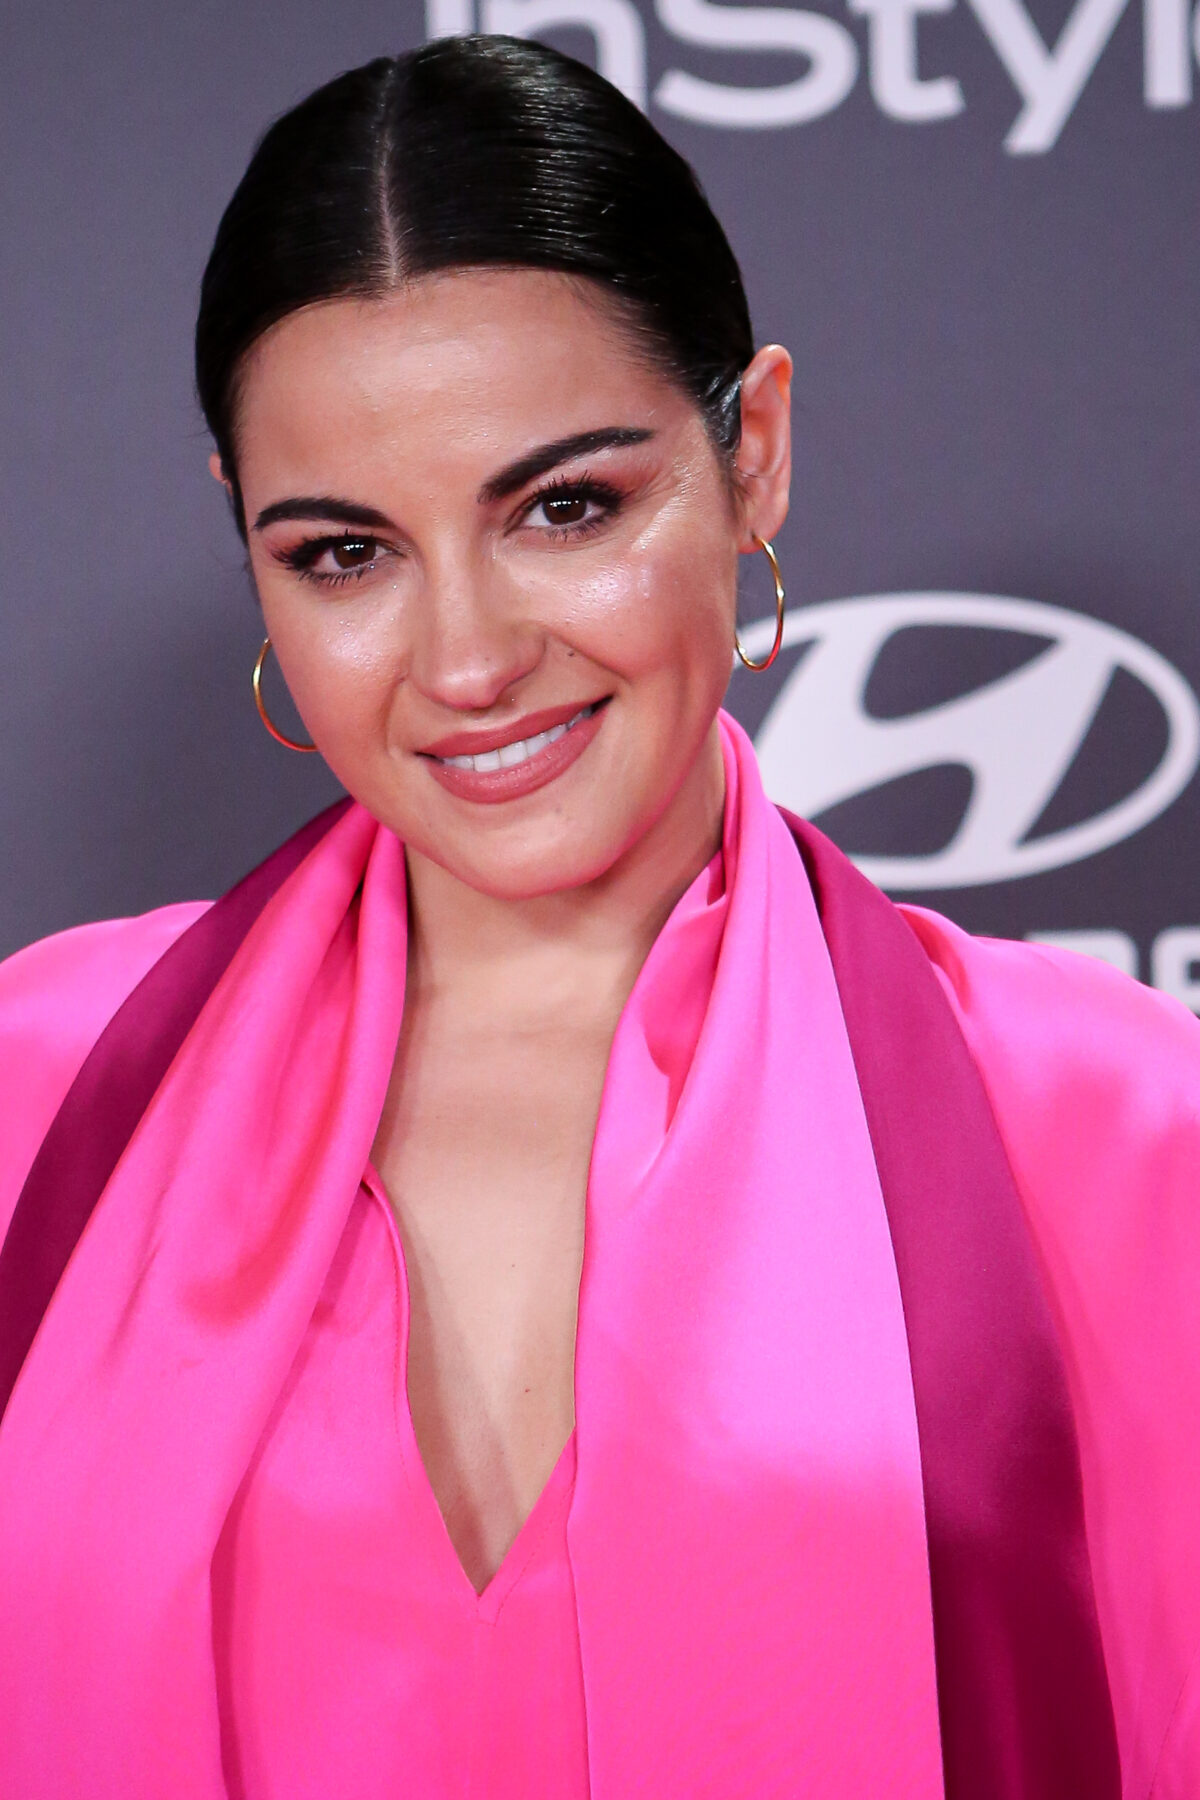 MADRID, SPAIN - MAY 24: Maite Perroni attends 'Instyle Beauty Night' party at the Real Fabrica De Tapices on May 24, 2022 in Madrid, Spain. (Photo by Pablo Cuadra/Getty Images)